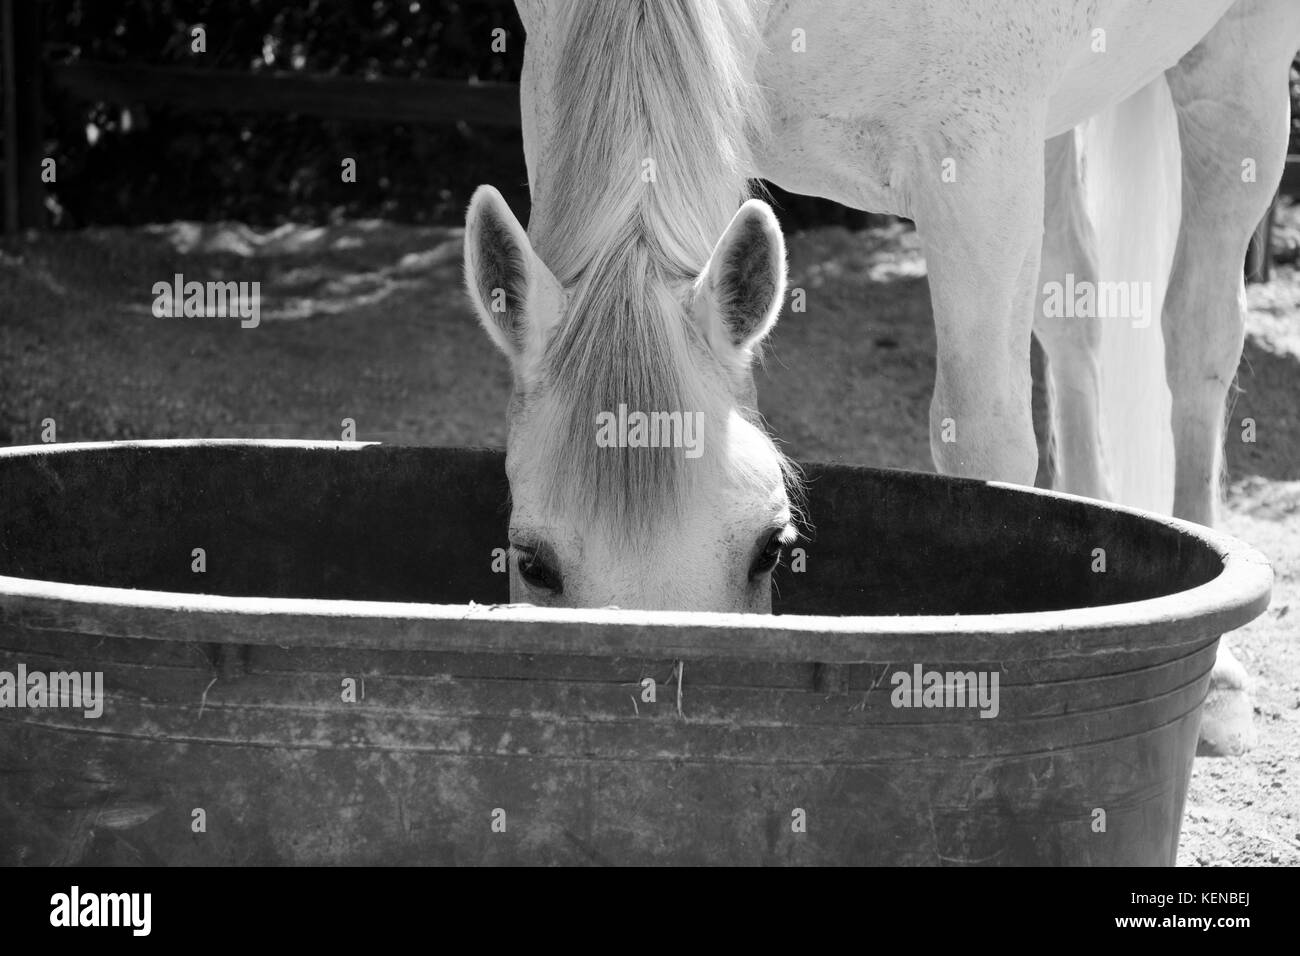 White horse eating some oats Stock Photo